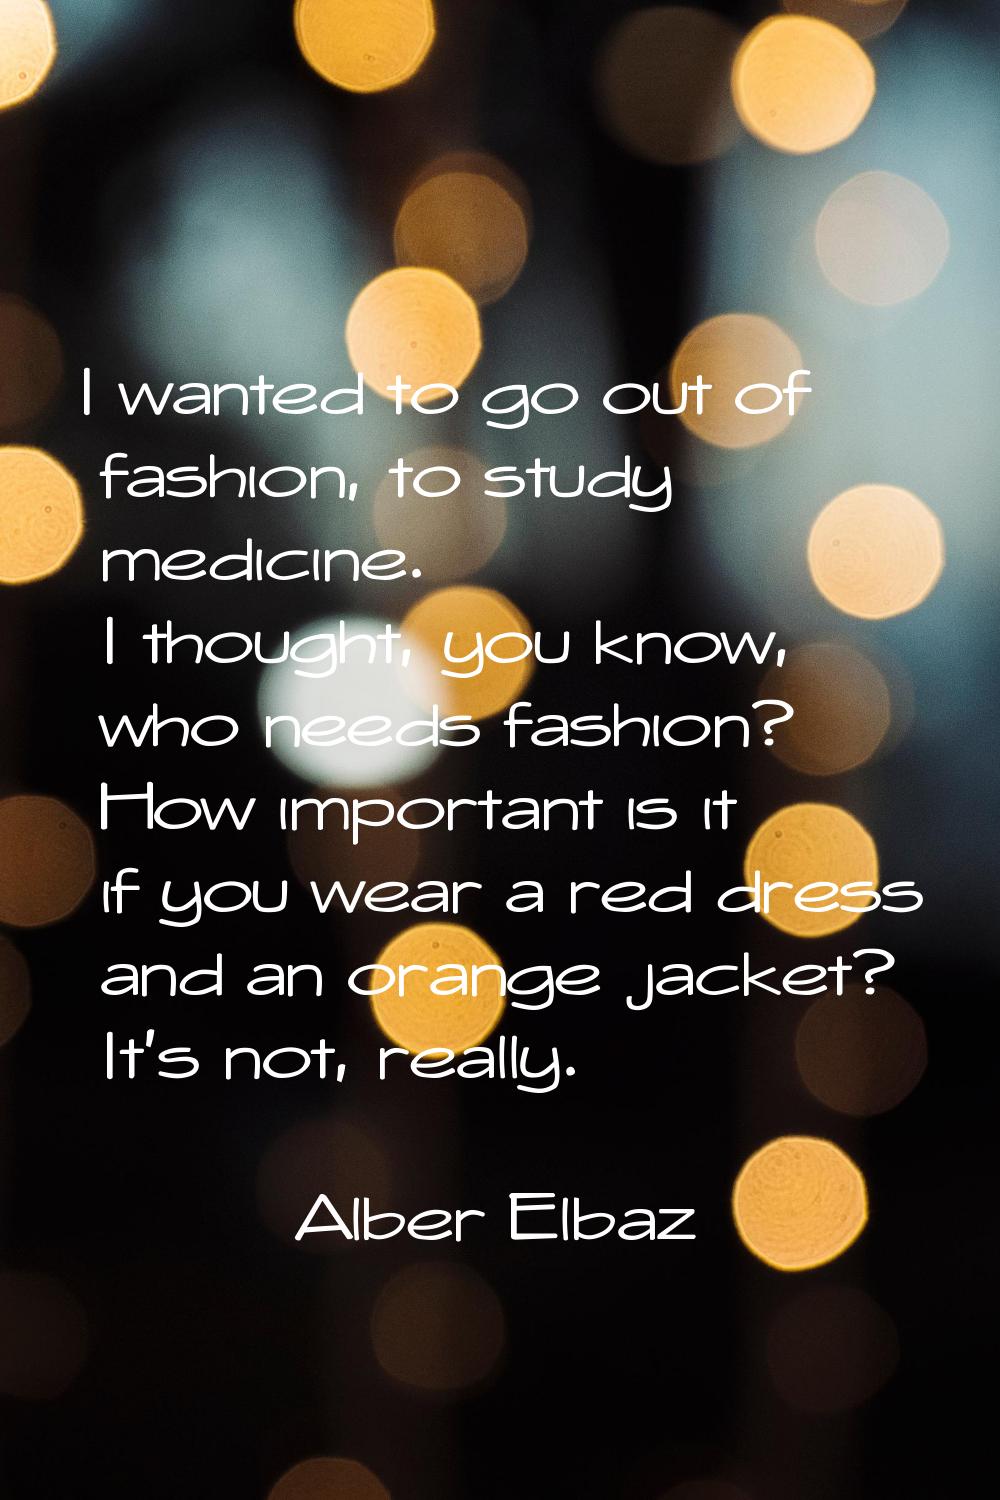 I wanted to go out of fashion, to study medicine. I thought, you know, who needs fashion? How impor